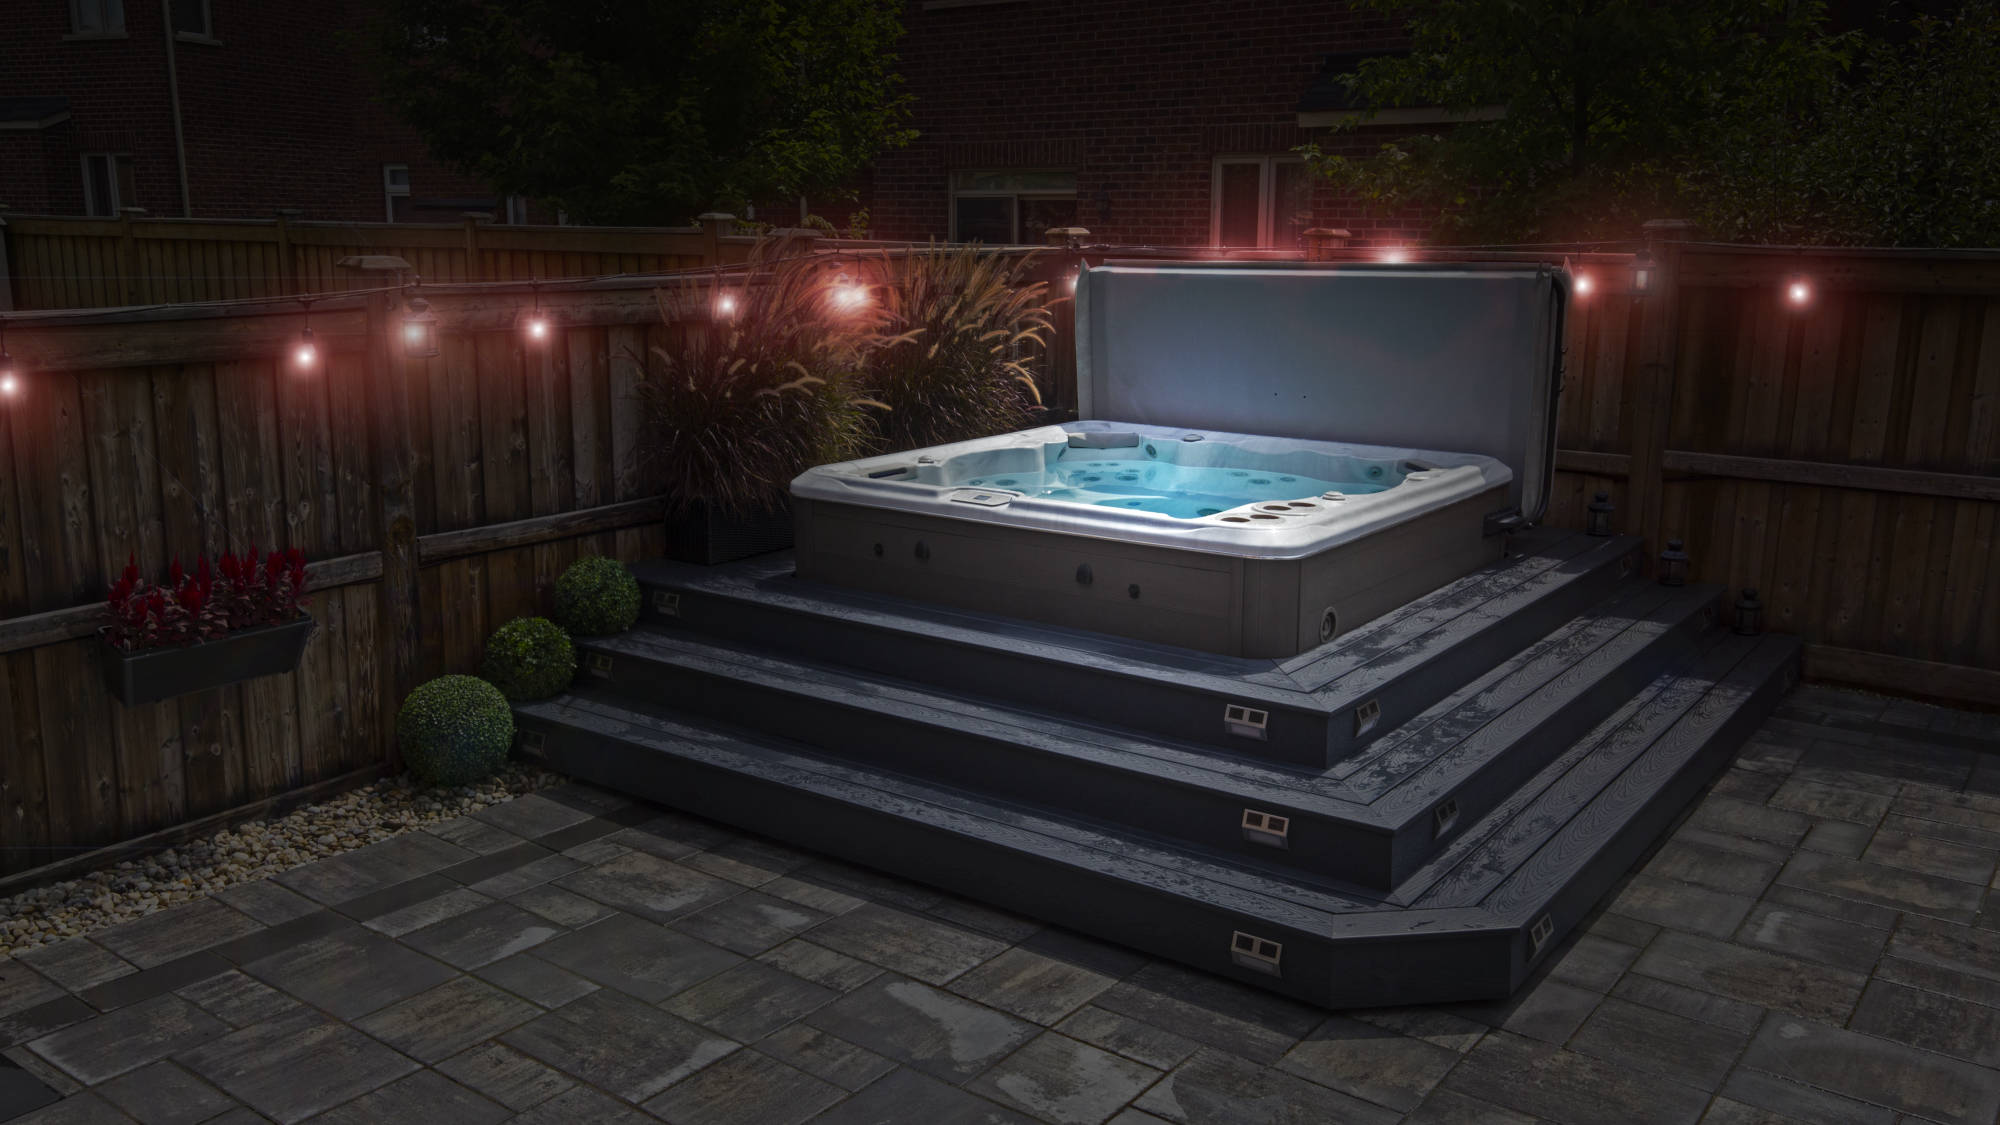 3 steps to the hot tub at night